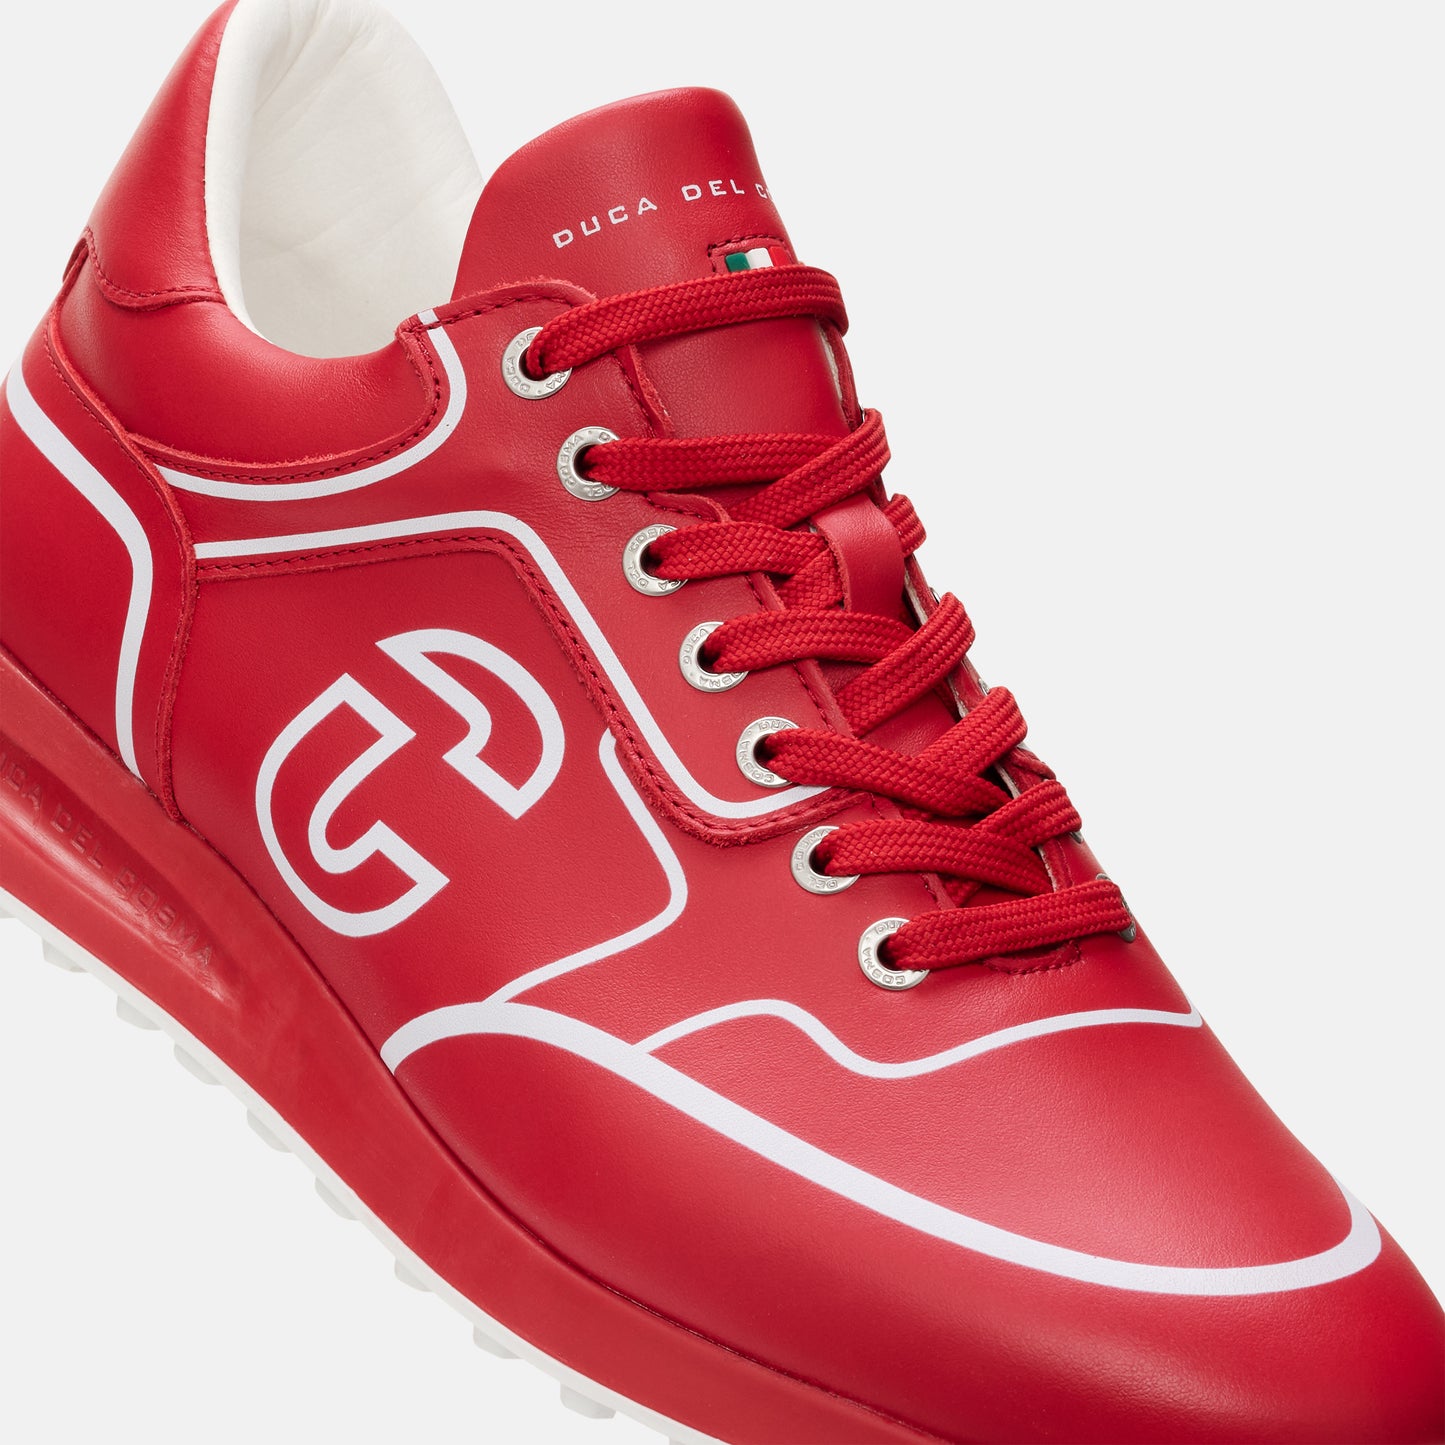 Red Golf Shoes, Waterproof Golf Shoes, Spikeless Golf Shoes, Duca del Cosma Men's Golf Shoes, Sneaker golf shoes.